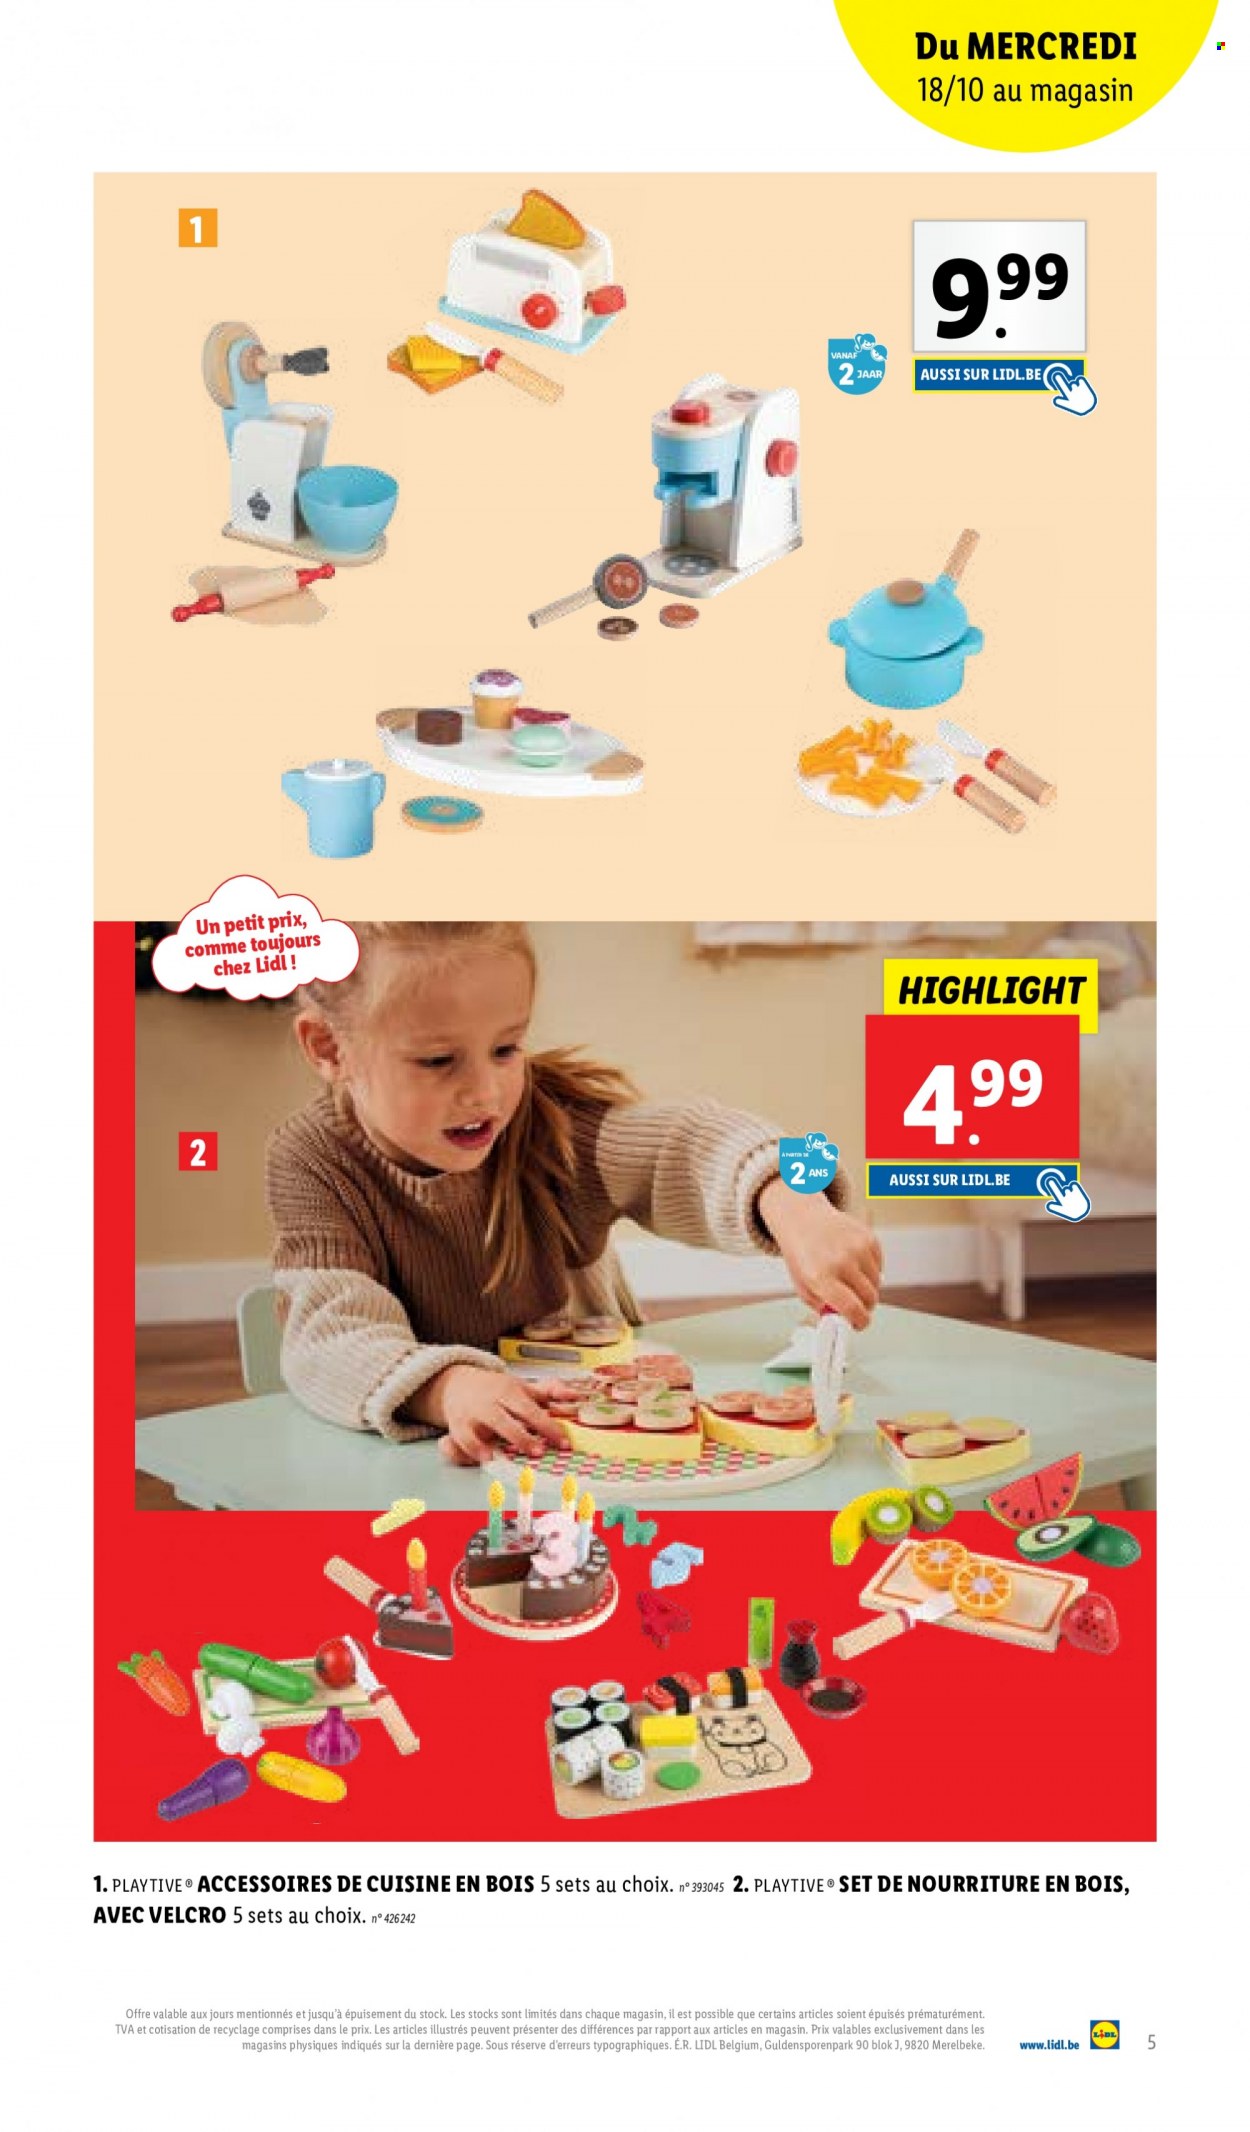 Catalogue Lidl. Page 5.